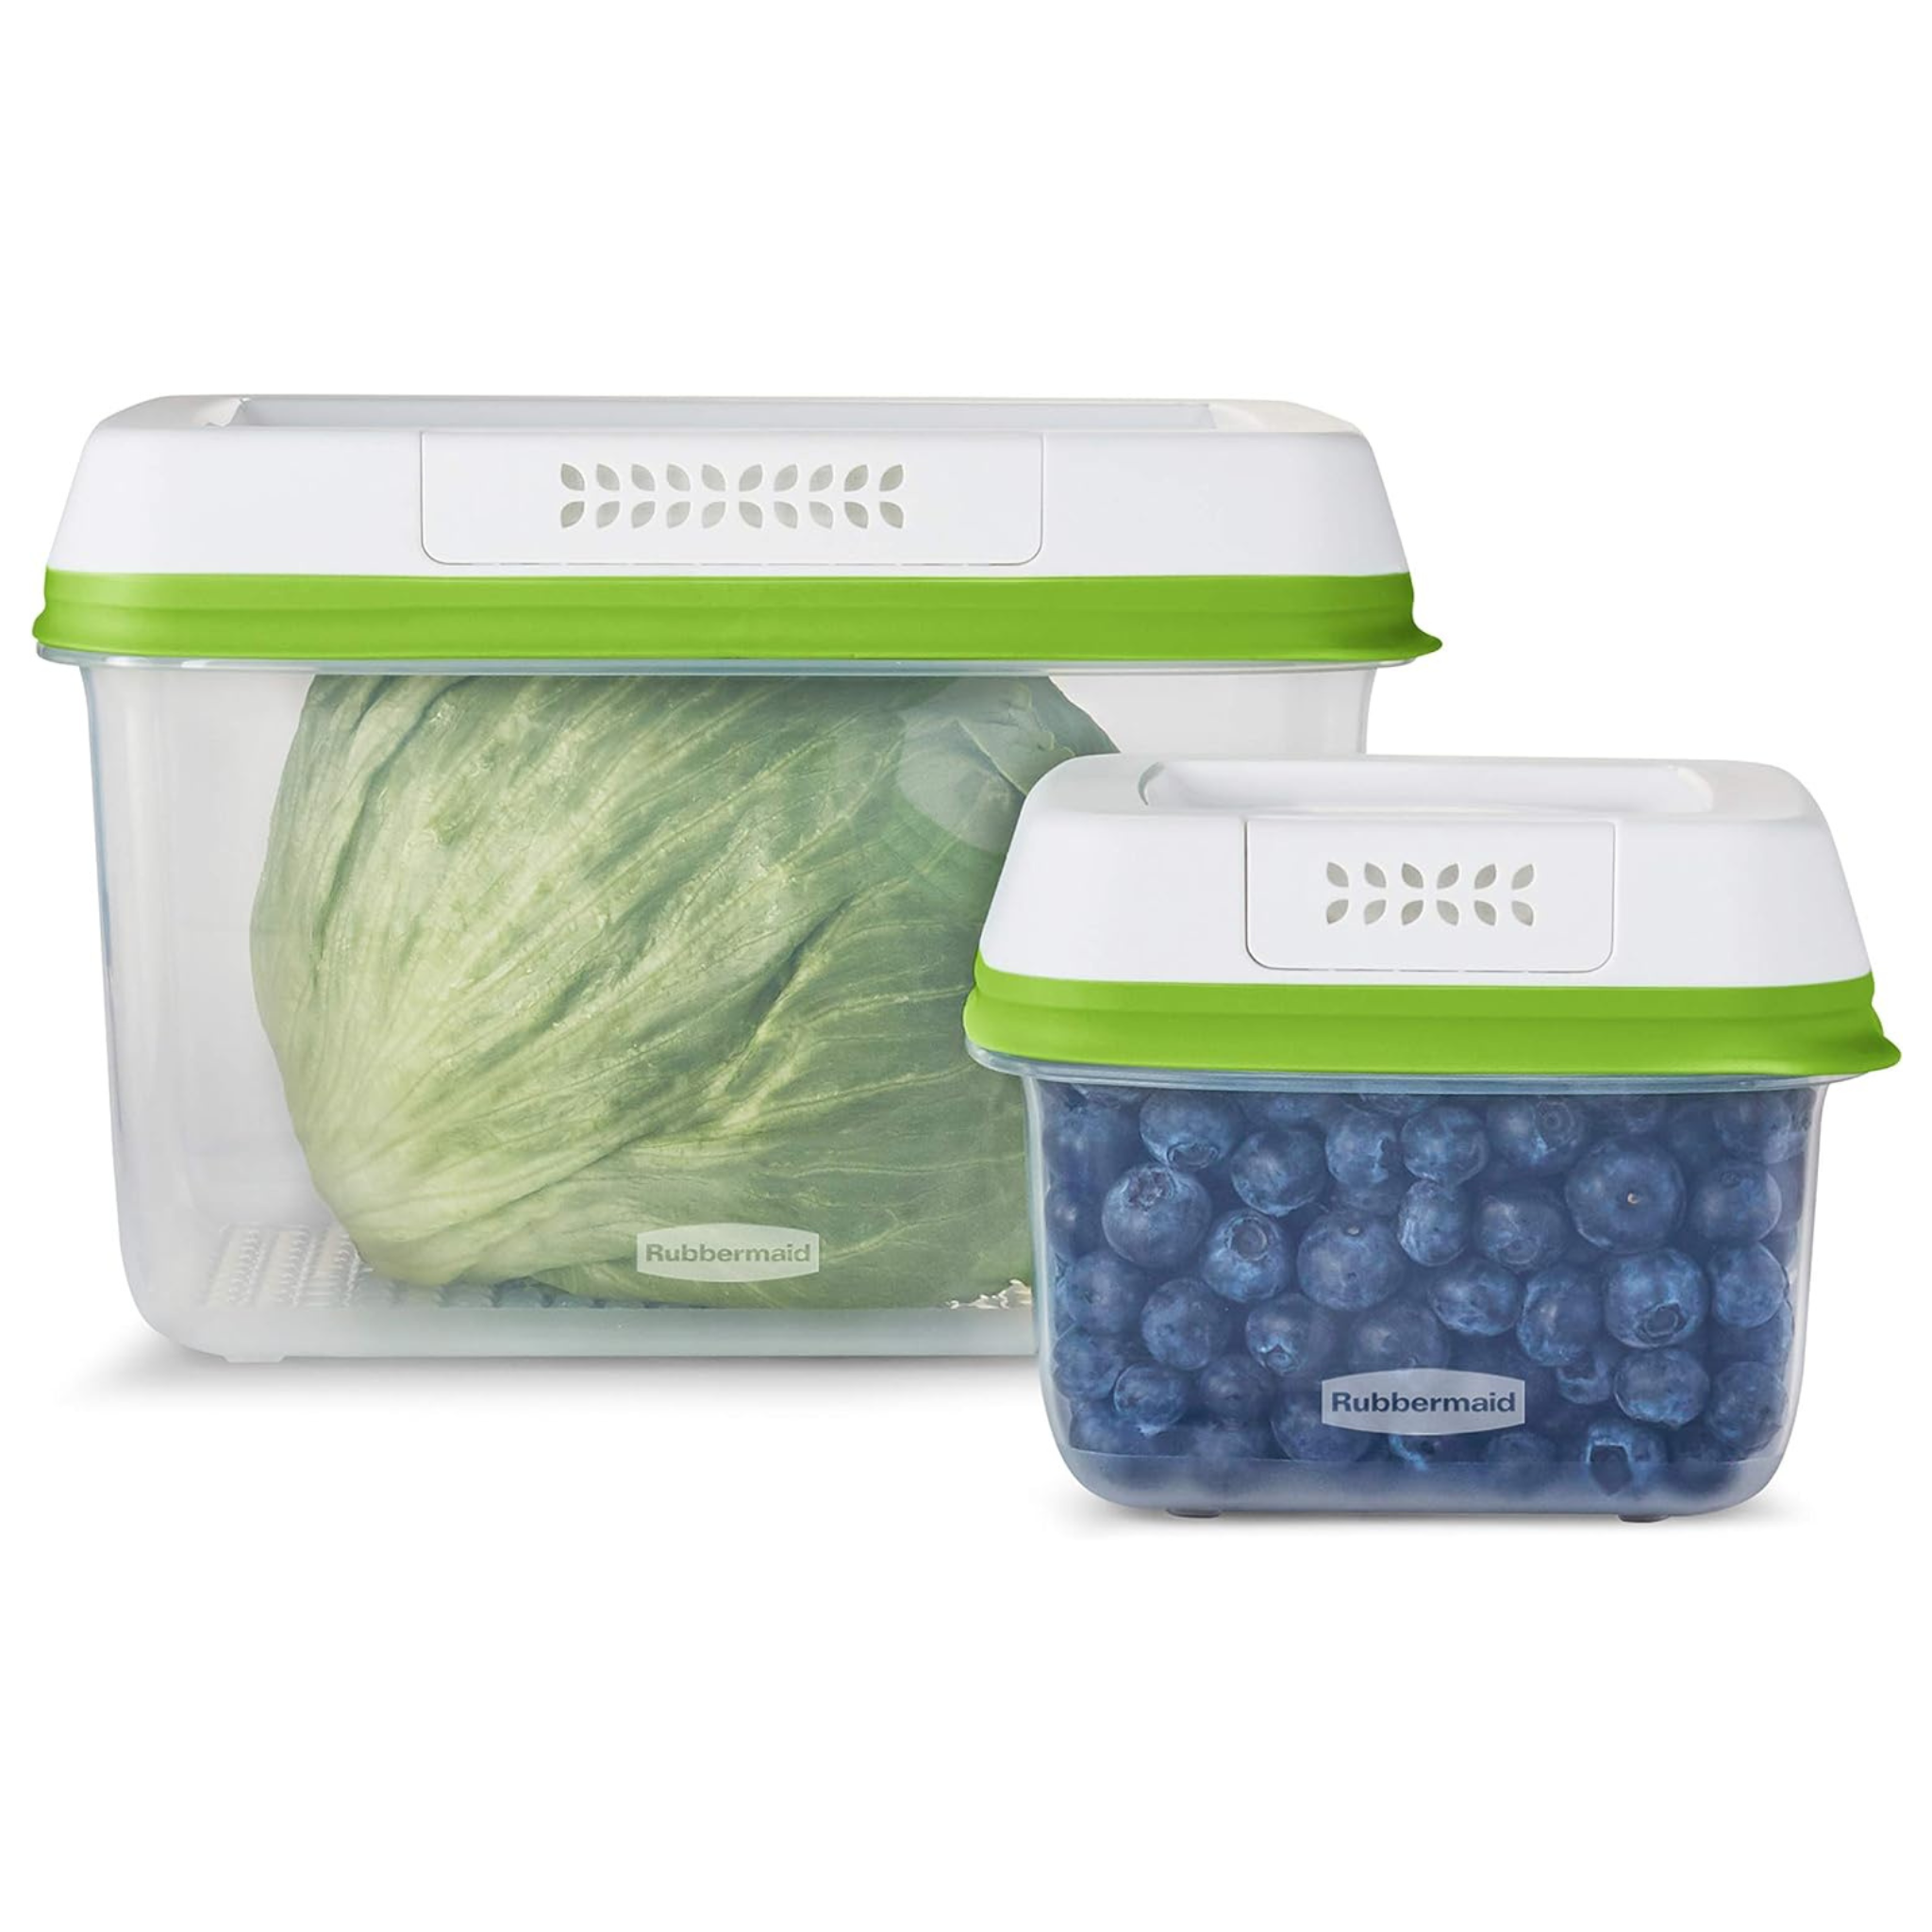 Rubbermaid 4.6-Cup Medium & 18.1-Cup Large Produce Saver Containers for Refrigerator